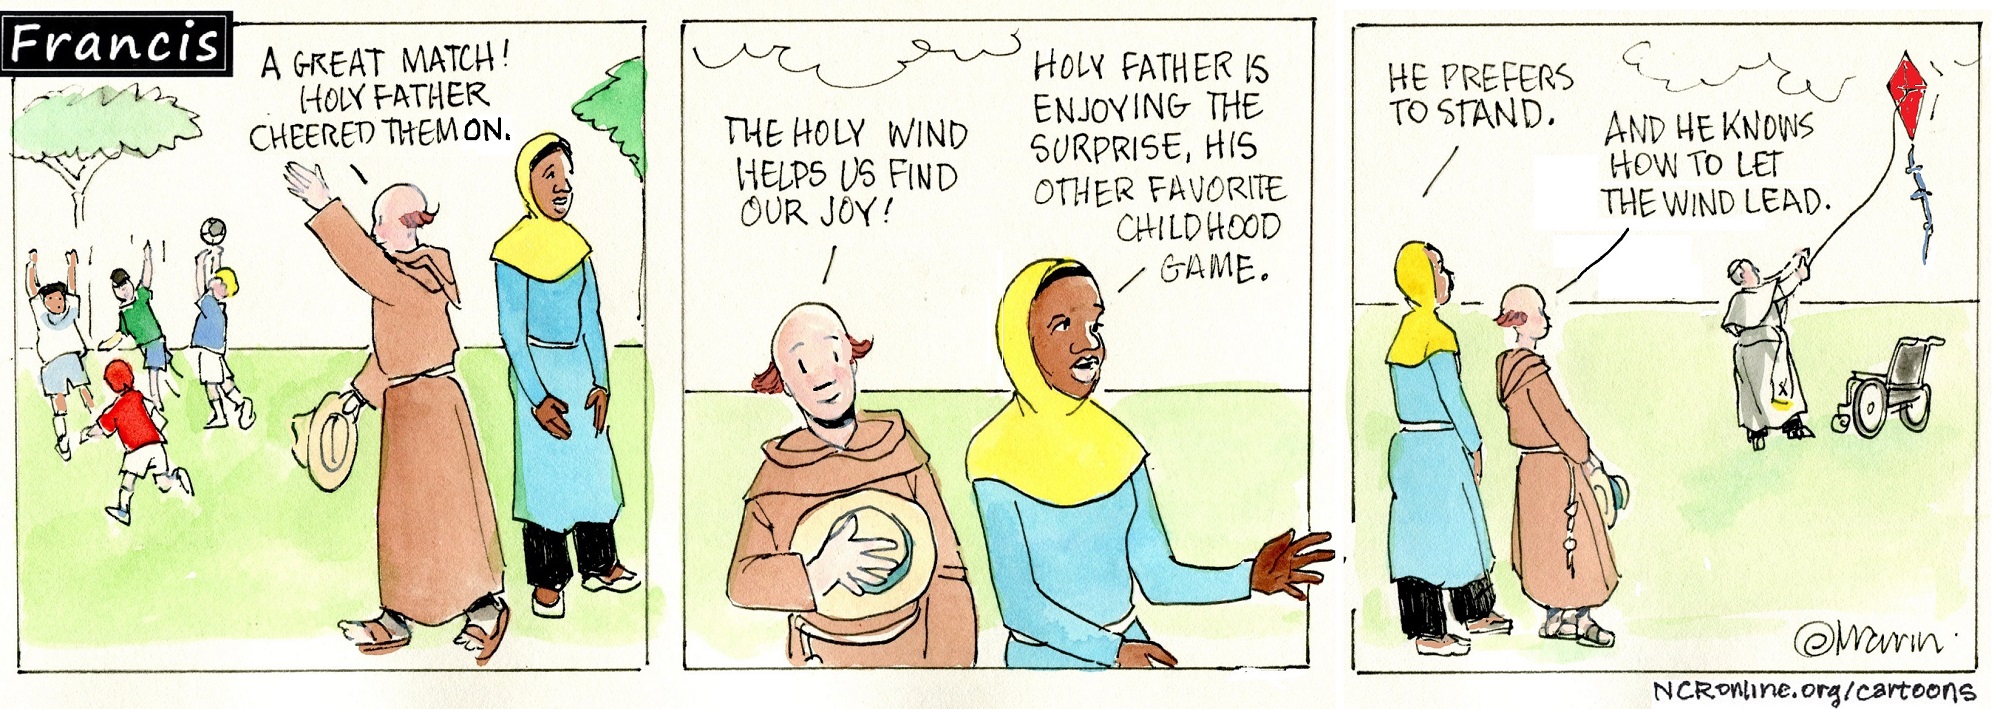 Francis, the comic strip: The wind leads to the big surprise.